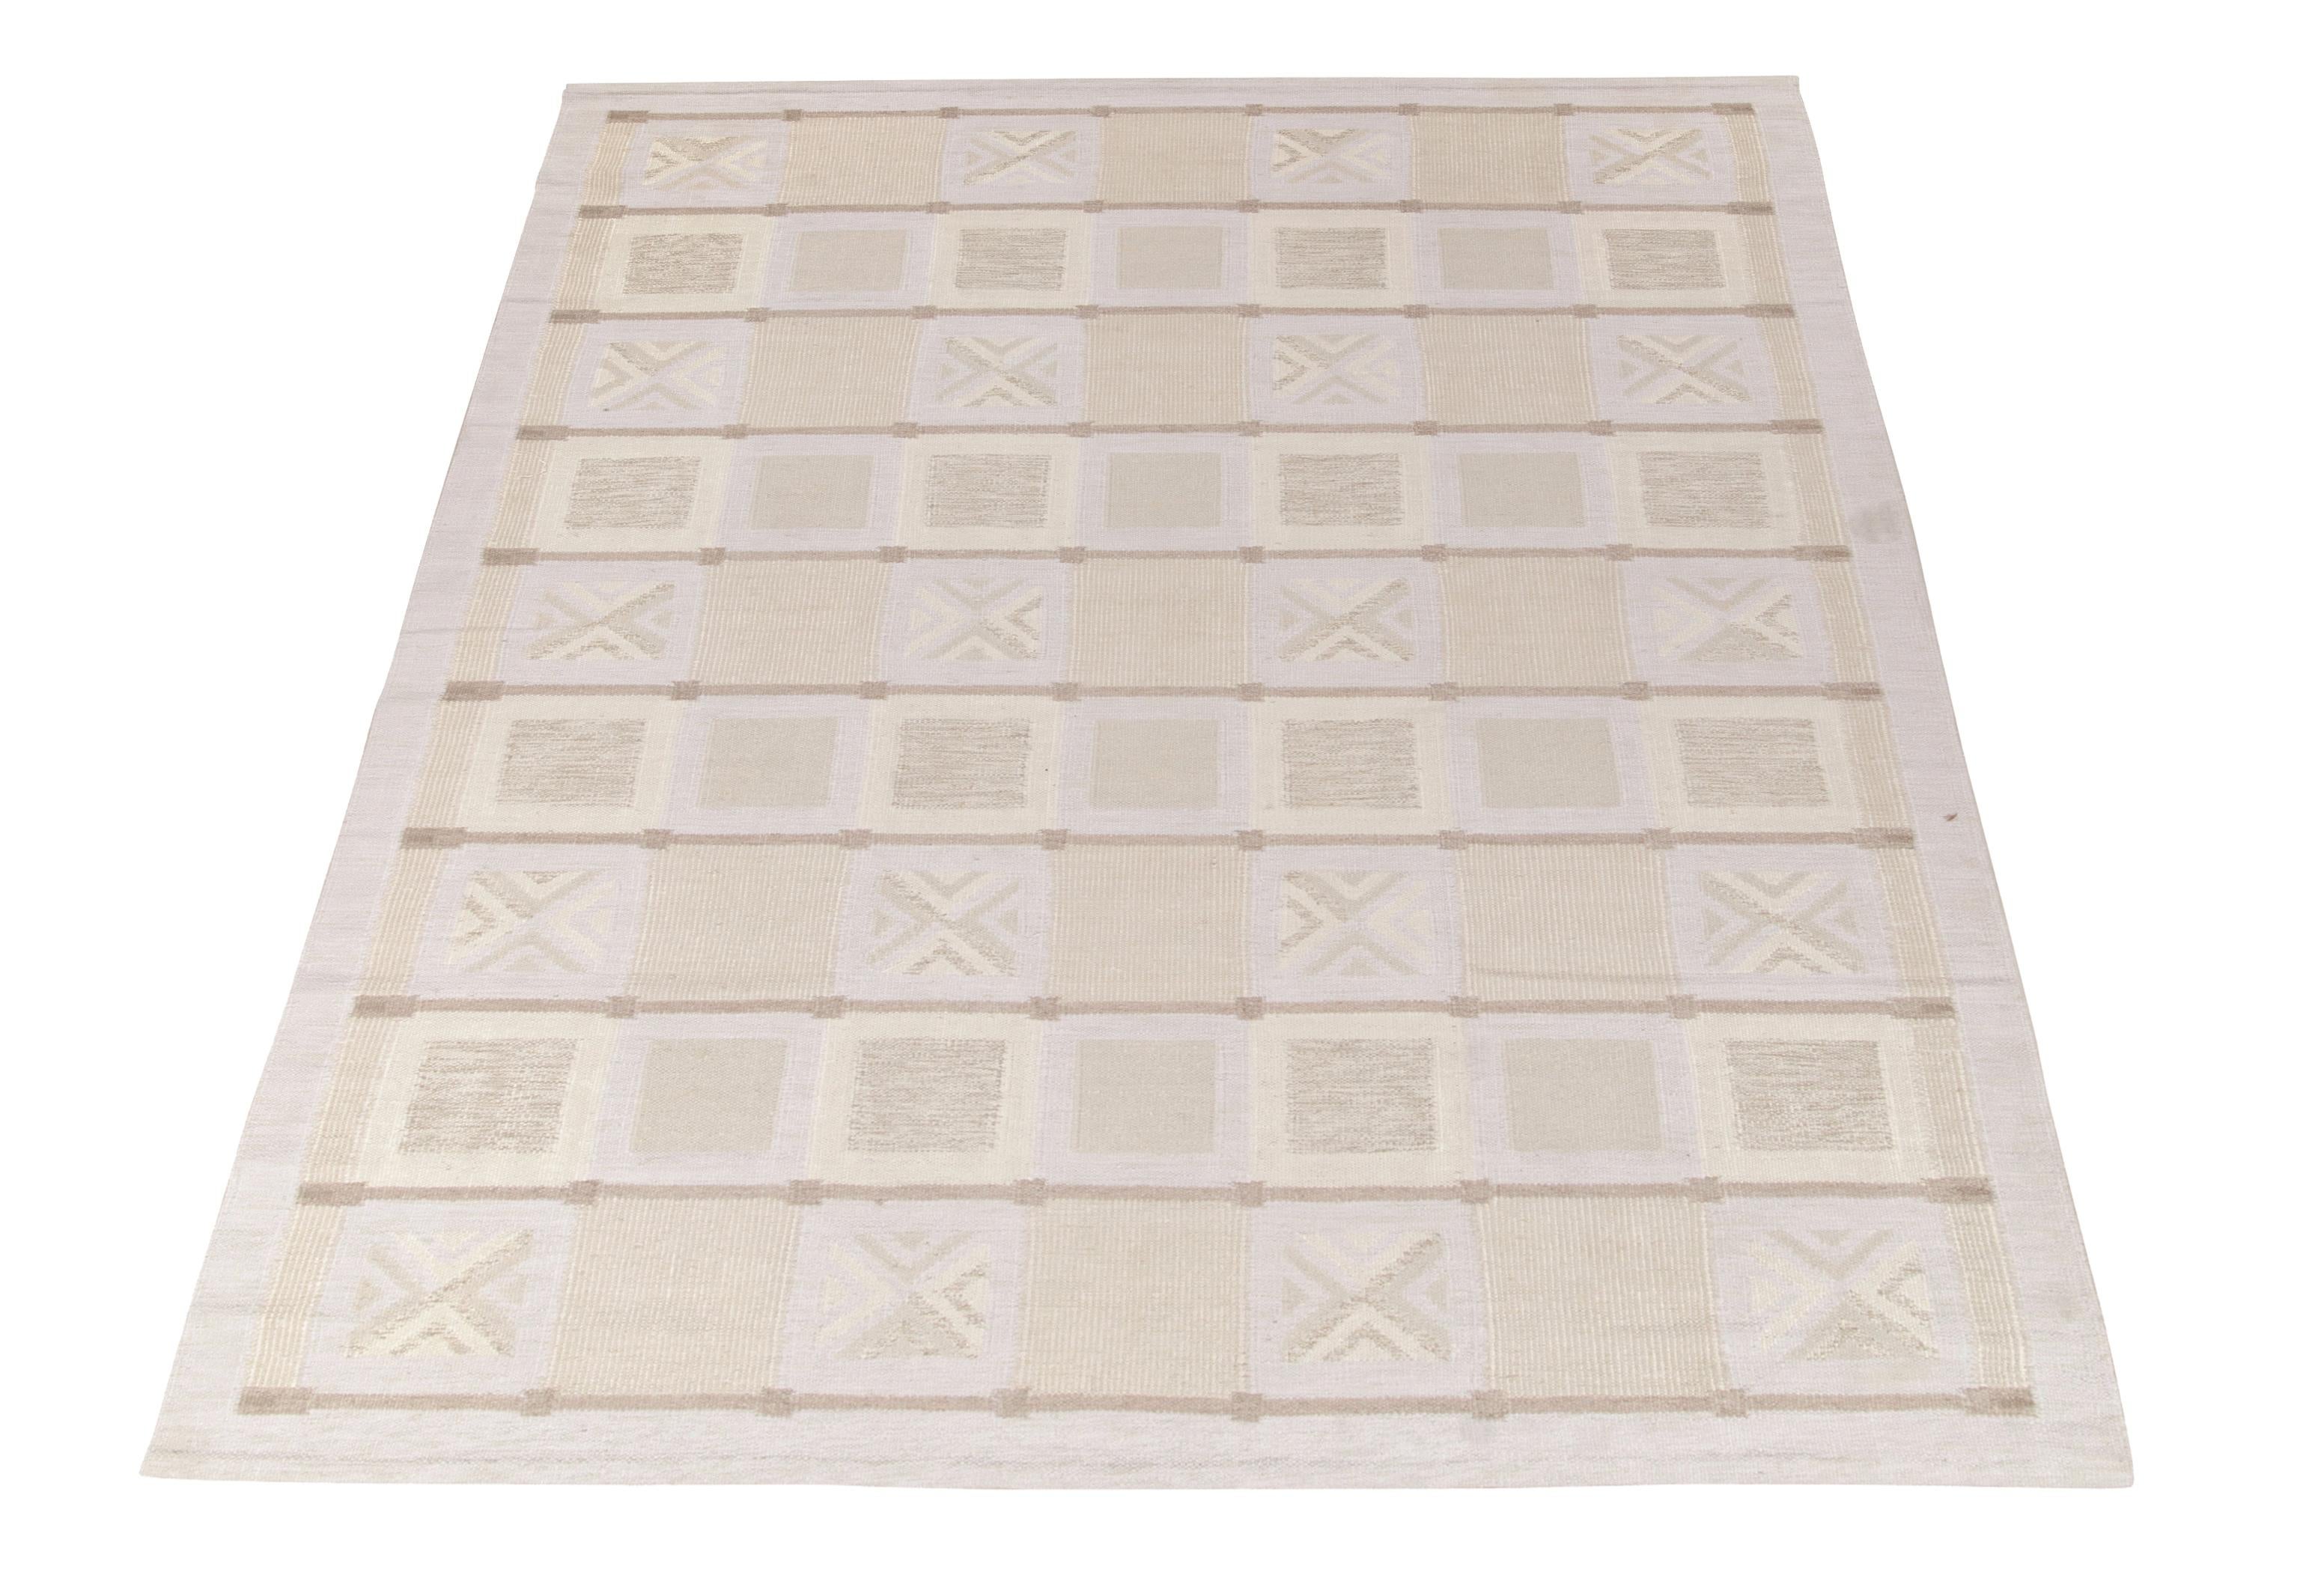 Exemplifying a modern take on Swedish Deco styles, a 10x15 flat weave from Rug & Kilim’s award-winning Scandinavian Kilim collection. The crispness of white & blue from our undyed natural yarns gives a cool element to the warmth of the beige-brown